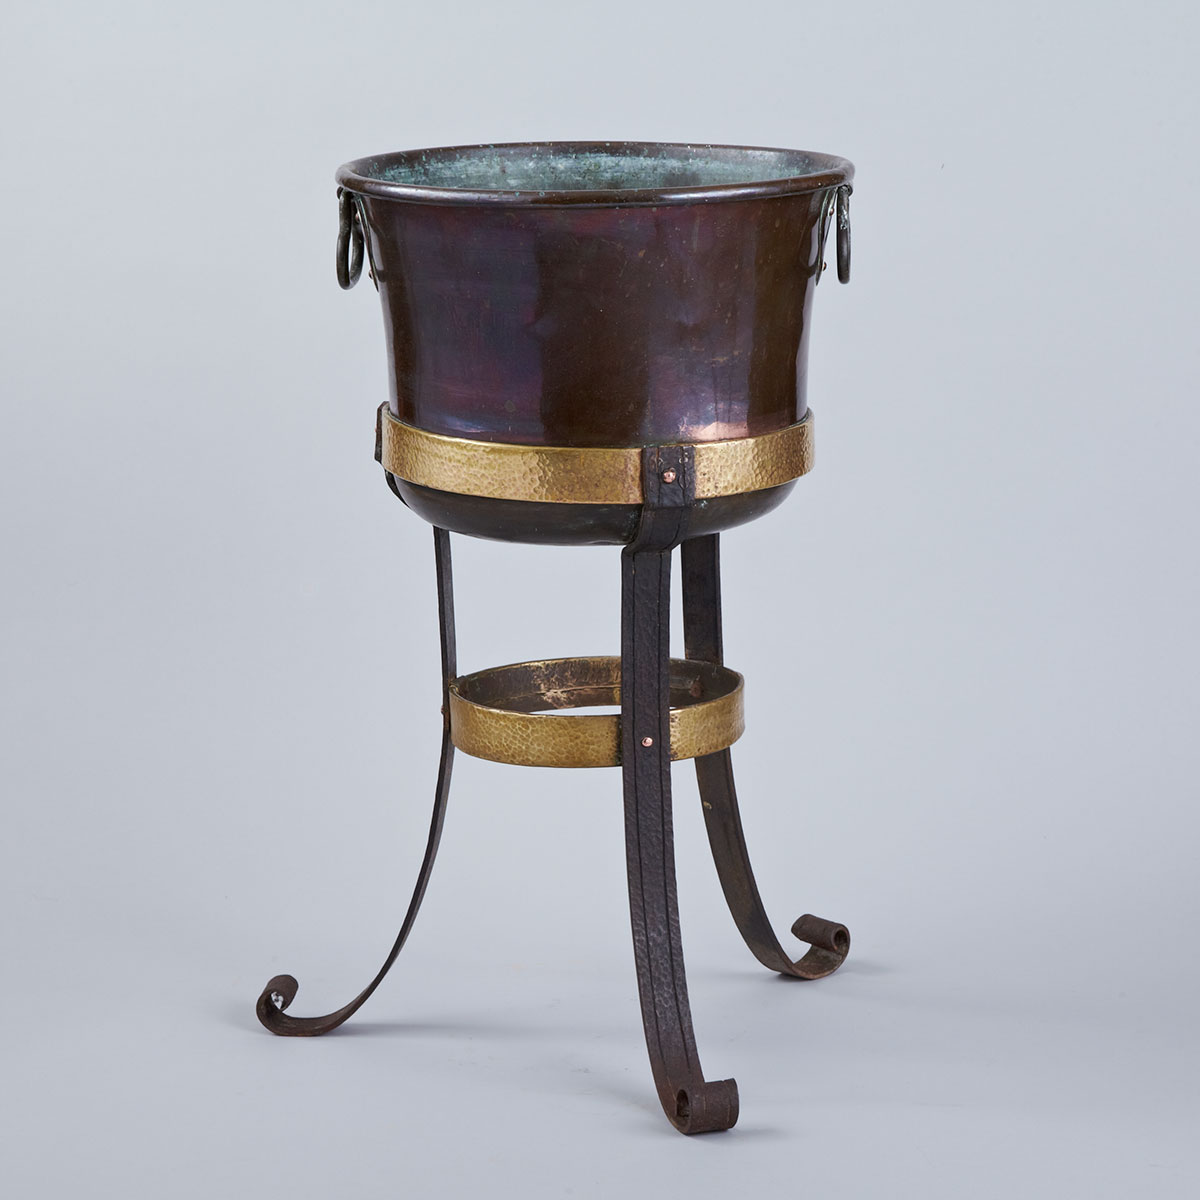 Arts and Crafts Wrought Iron, Copper and Brass Wine Cooler Jardiniere on Stand, c.1900